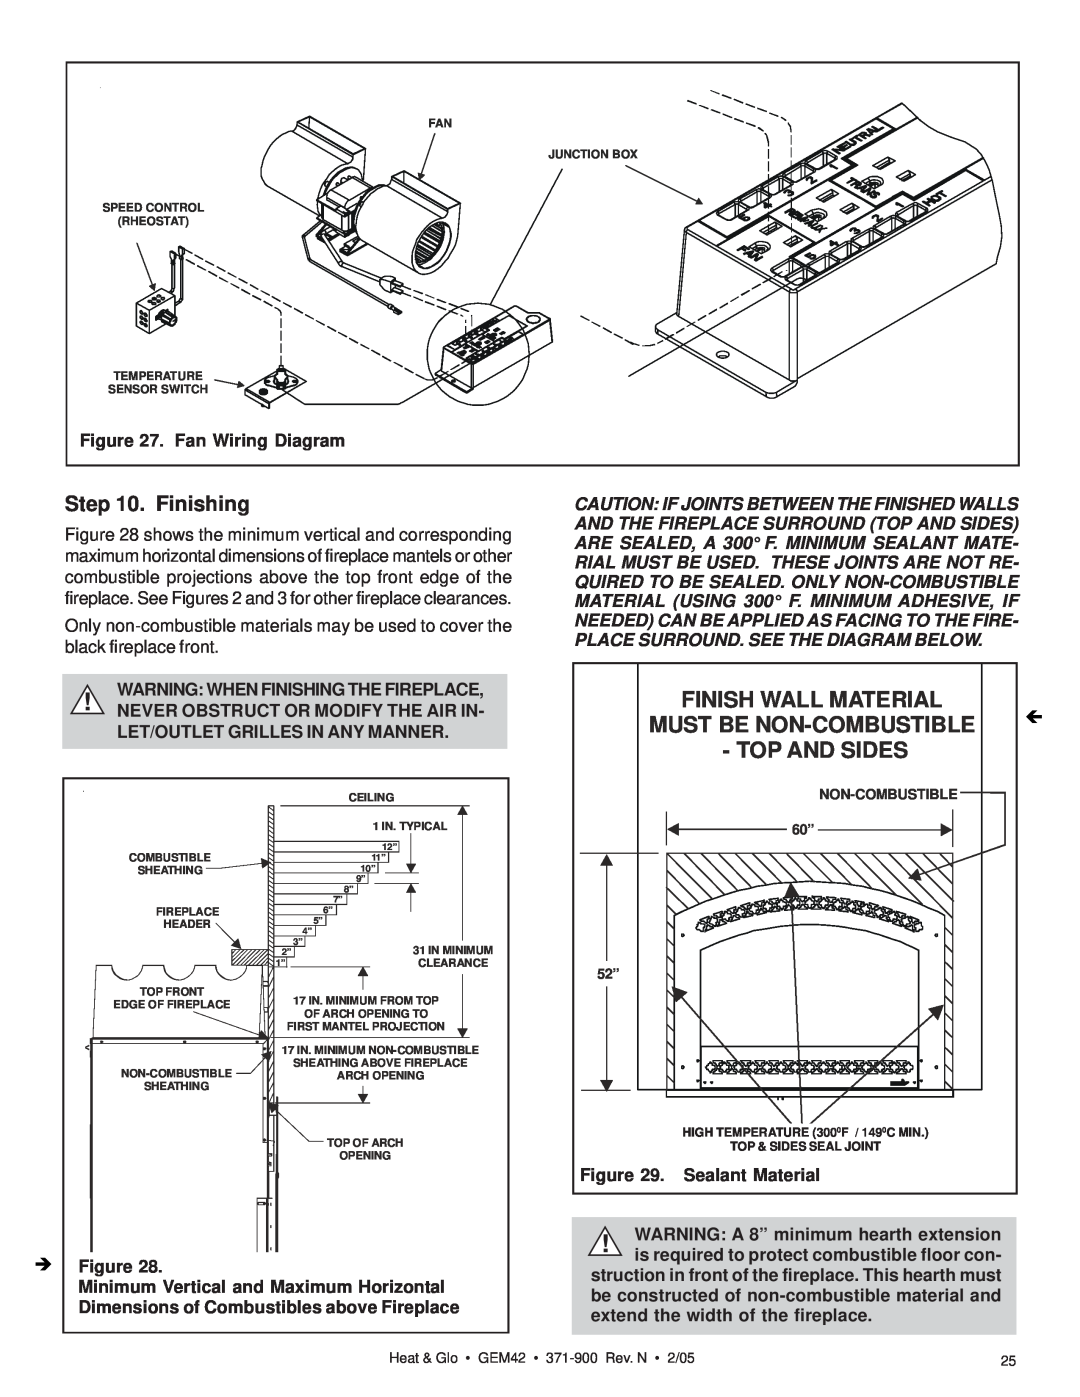 Heat & Glo LifeStyle GEM42 Finishing, Finish Wall Material, Must Be Non-Combustible, Top And Sides, Fan Wiring Diagram 